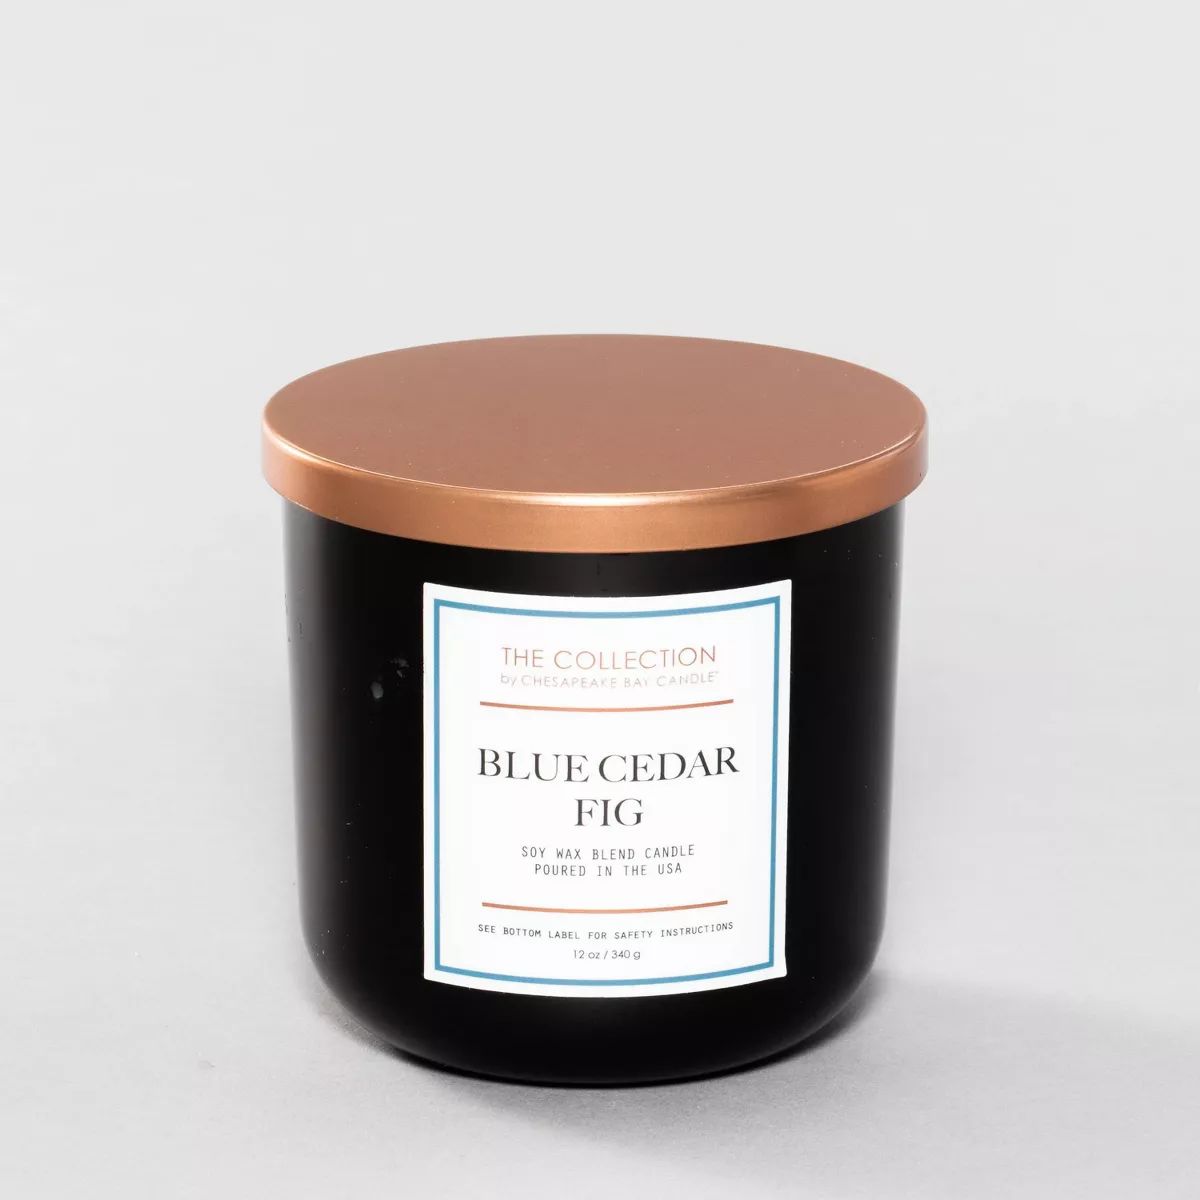 12oz Lidded Glass Jar 2-Wick Candle Blue Cedar Fig - The Collection By Chesapeake Bay Candle | Target